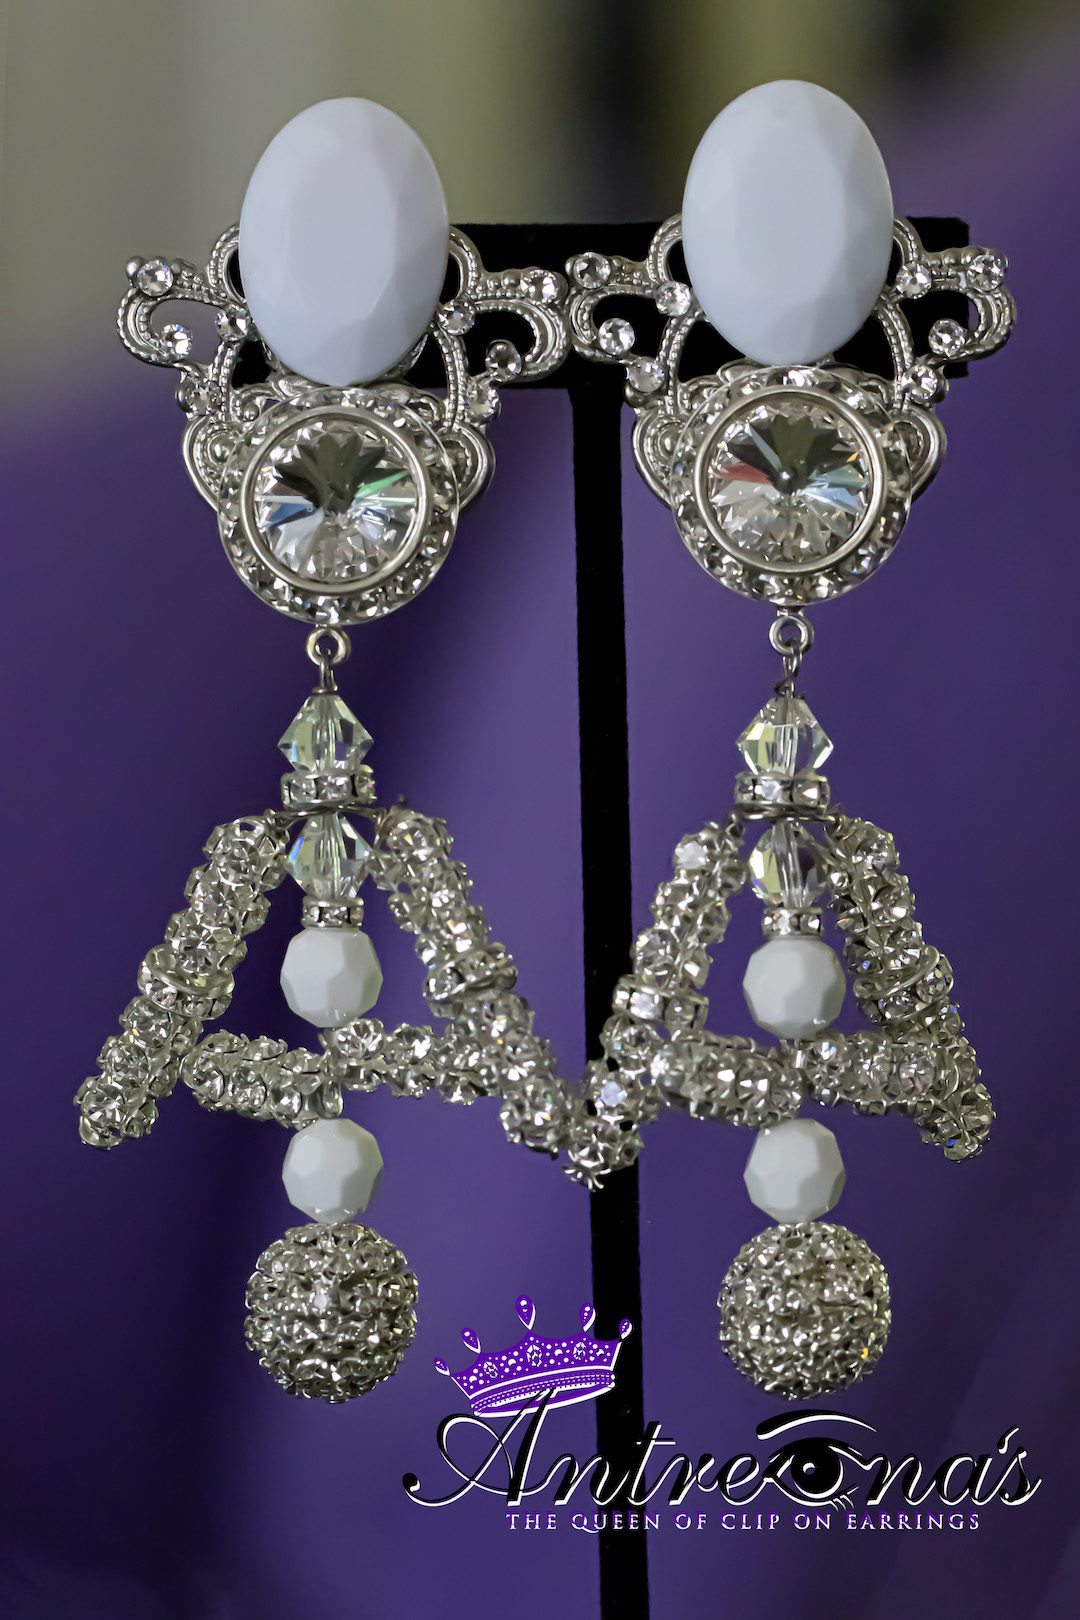 Comfy premium crystal lightweight eye-catching Queen's collection earrings with clips